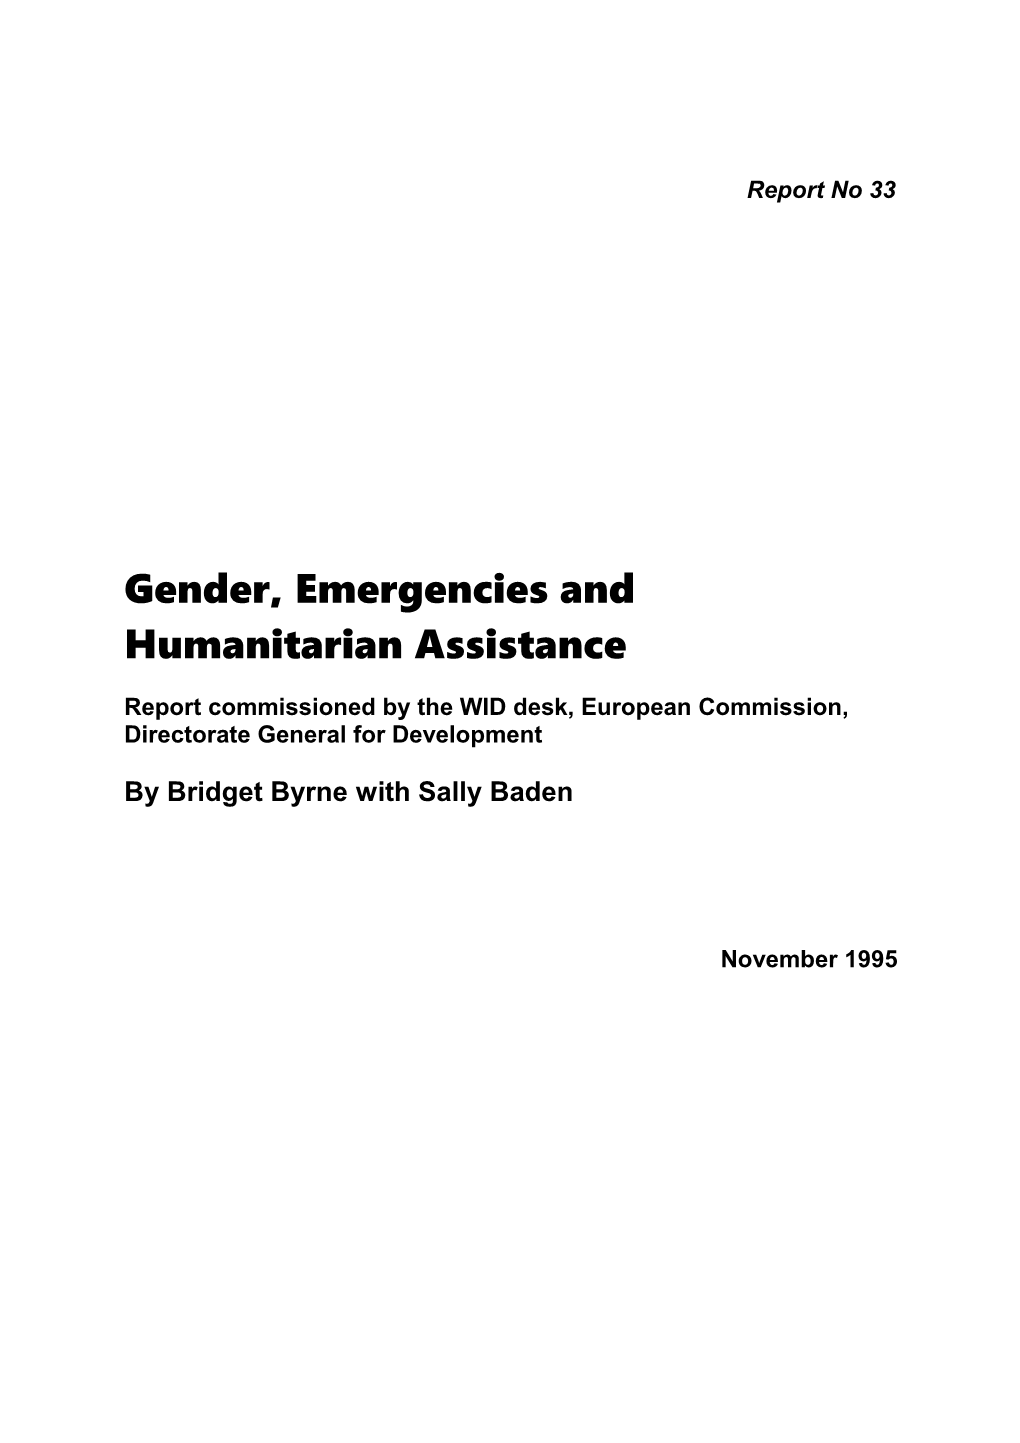 Gender and Humanitarian Assistance